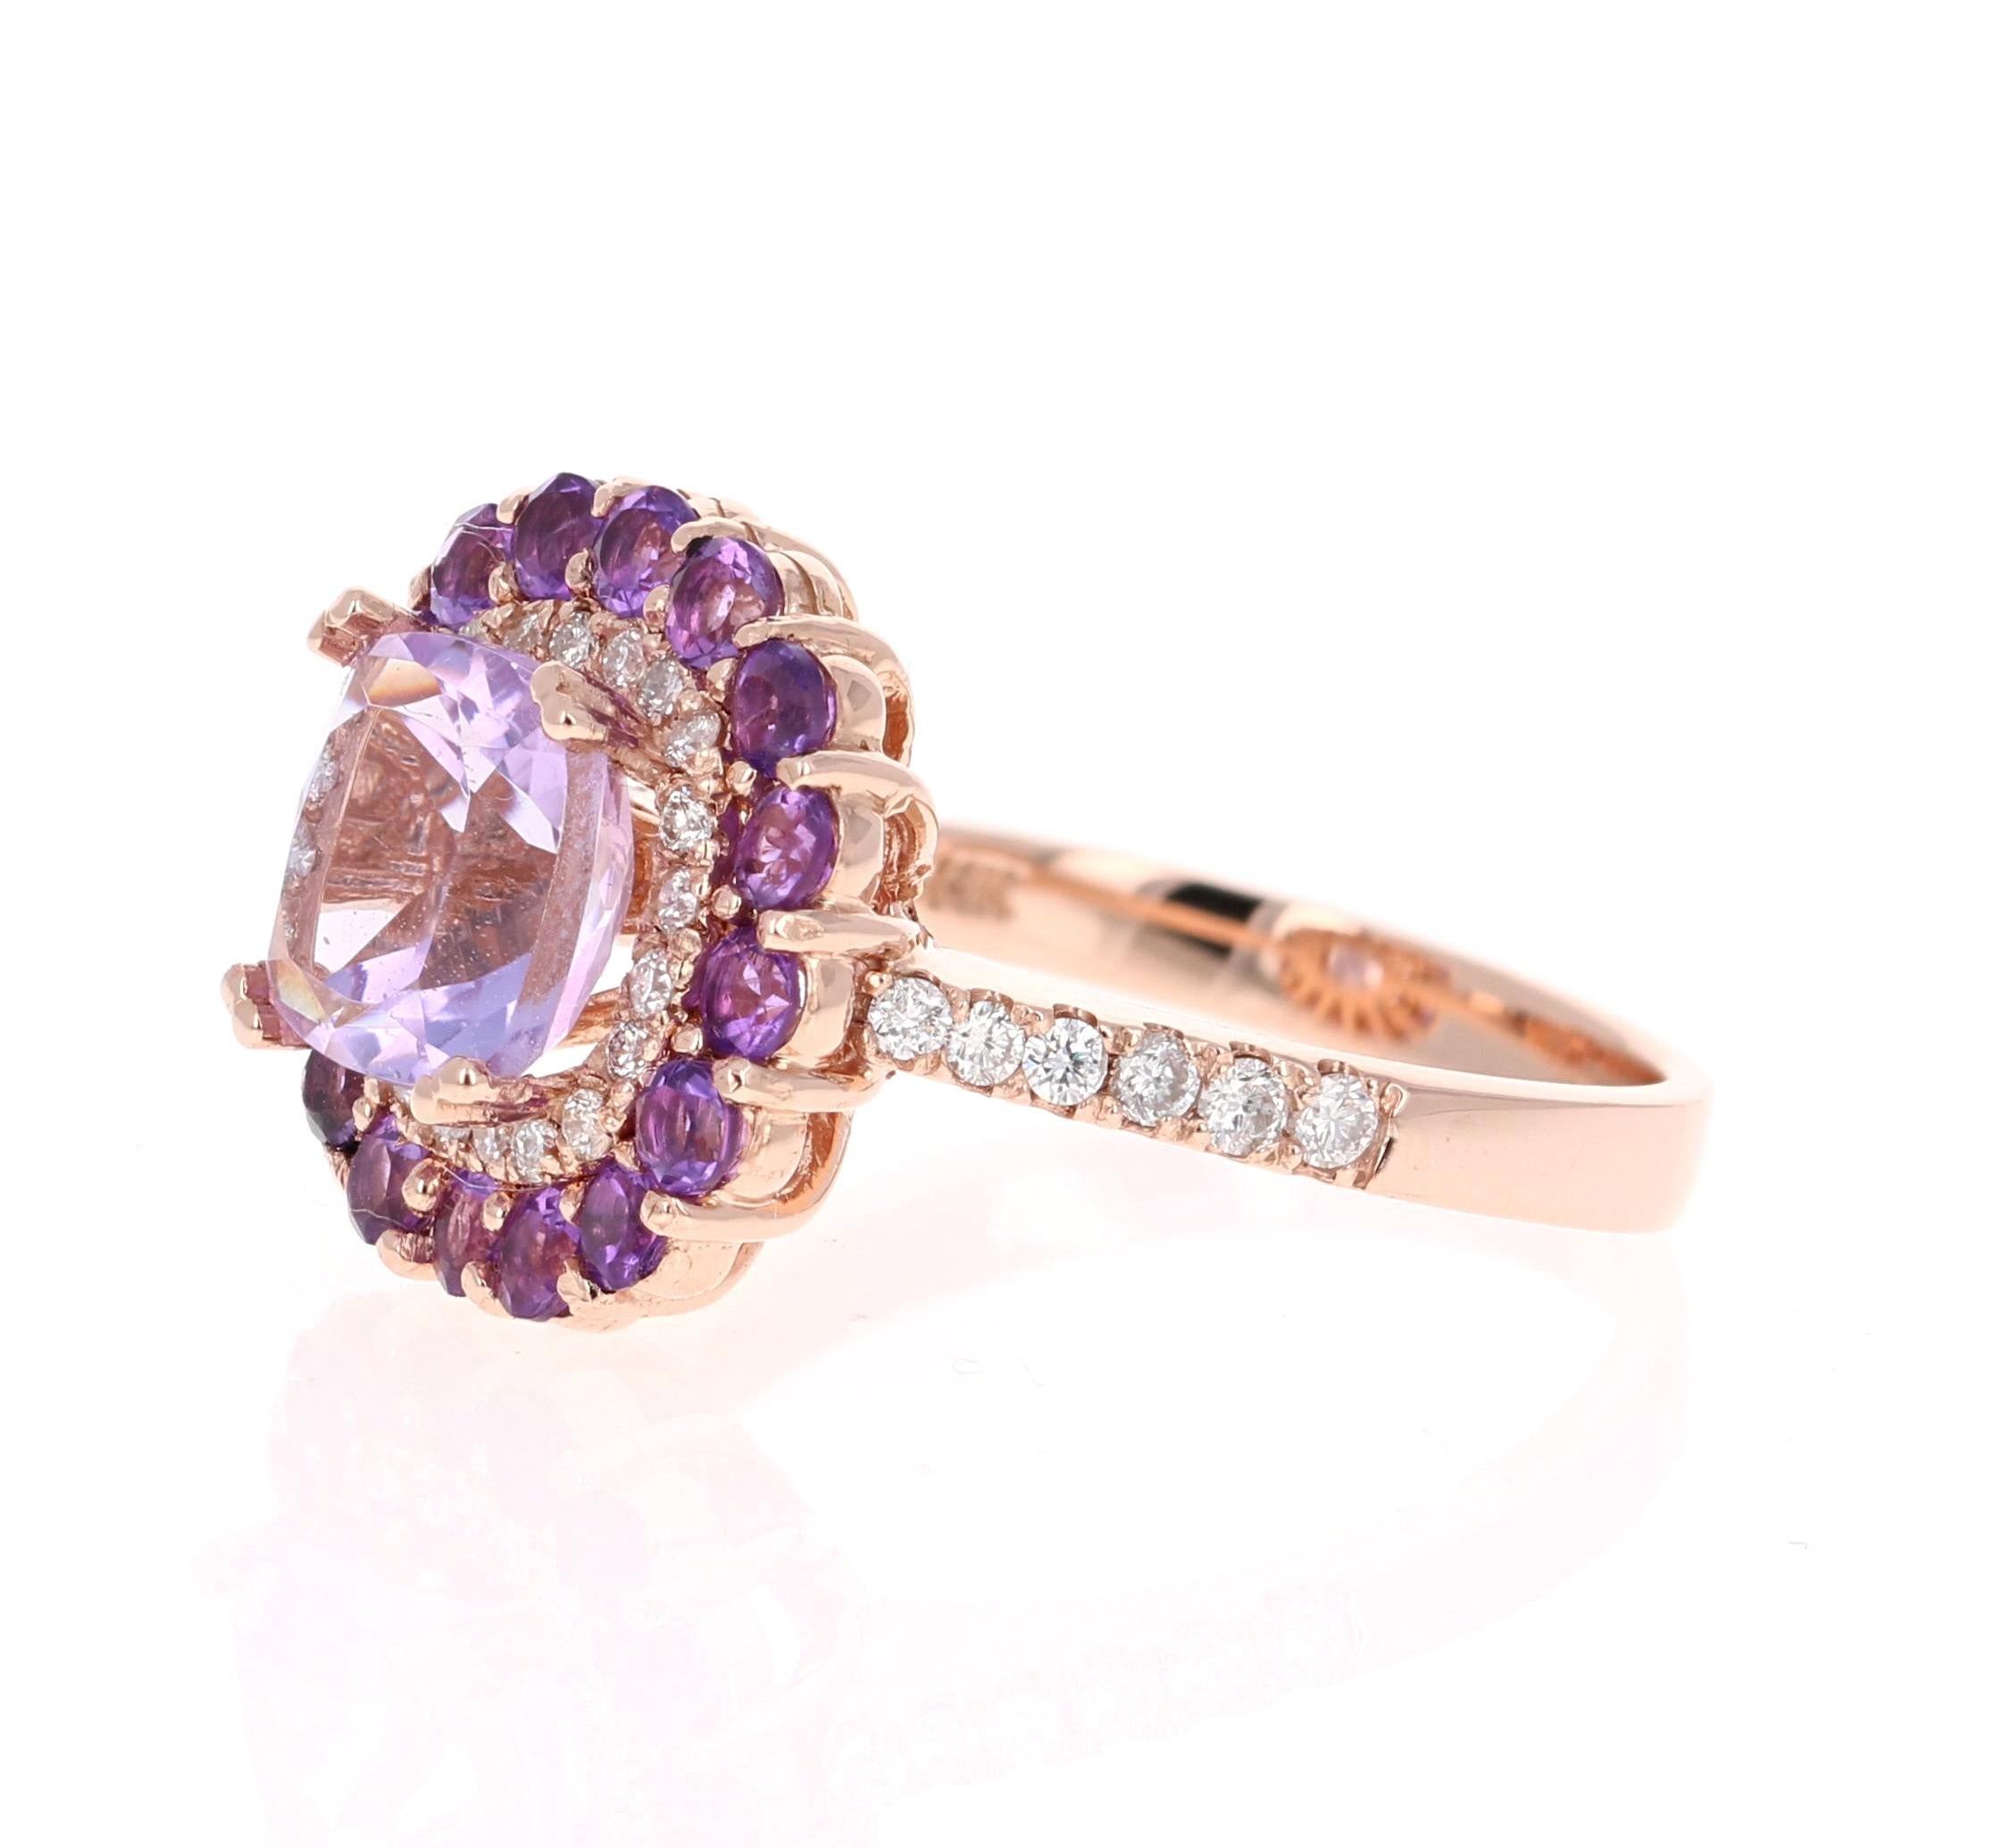 Contemporary 3.56 Carat Cushion Cut Amethyst Diamond Rose Gold Cocktail Ring For Sale